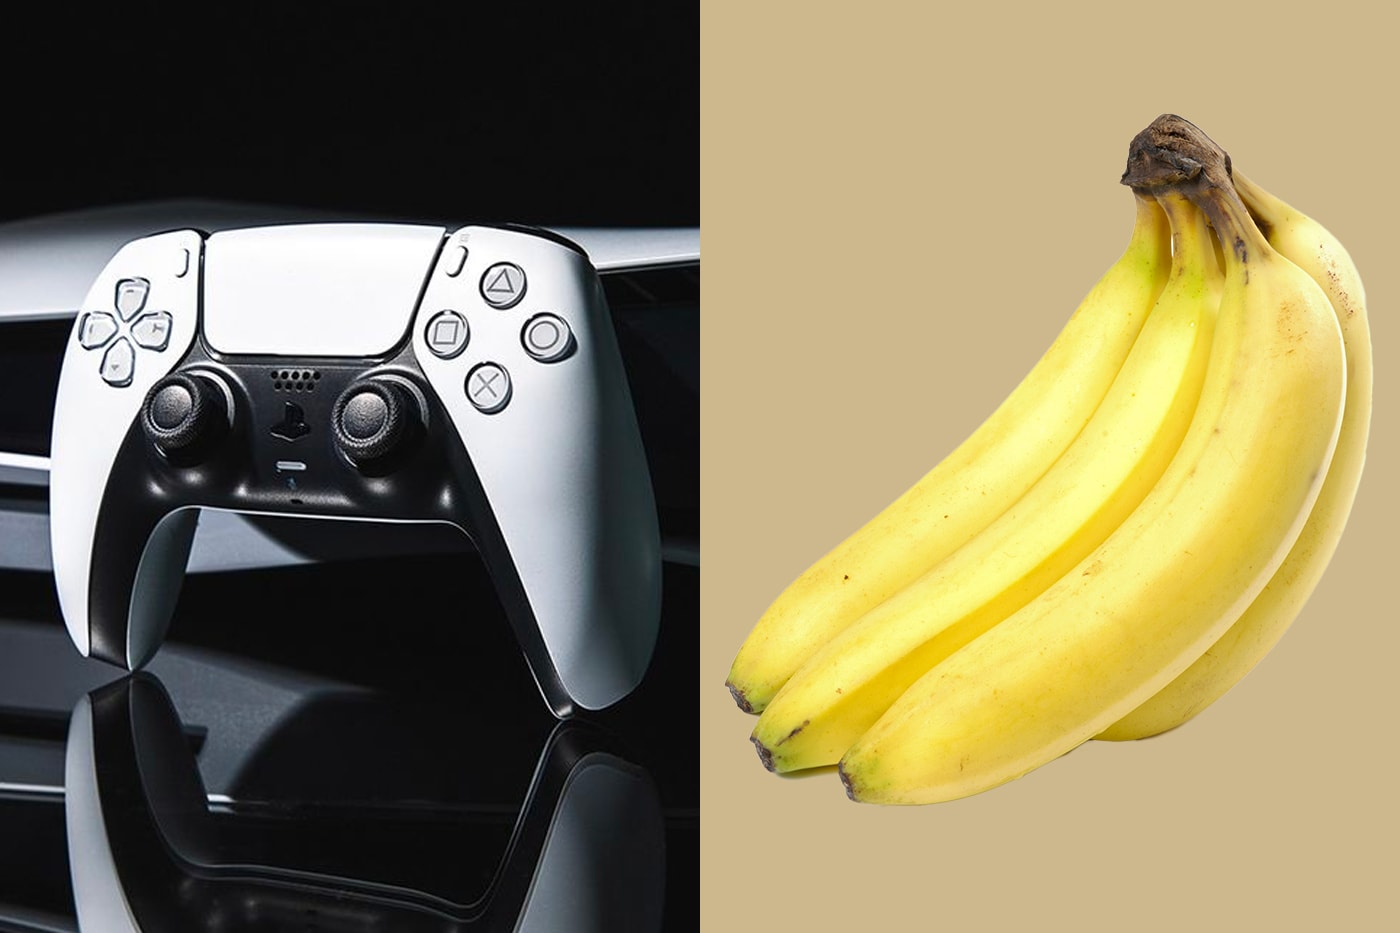 Sony Is Looking to Turn Banana passive non-luminous object gaming controller patent news tech Japan AI VR Gaming PS5 Playstation Patents 